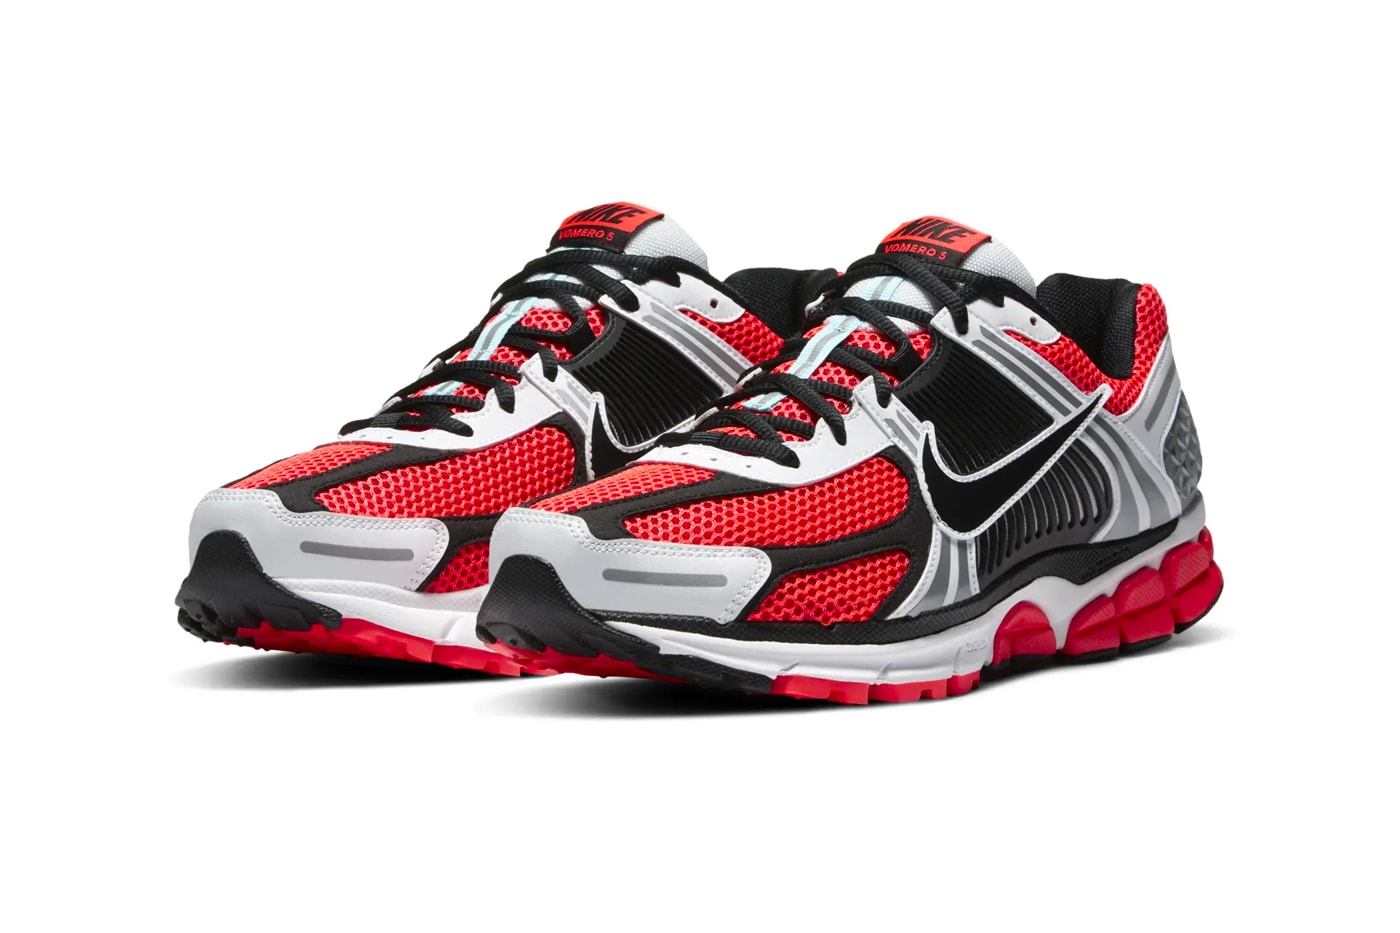 Nike Zoom Vomero SE bright crimson CZ8667 600 menswear streetwear sneaker shoes kicks trainers runners collection spring summer 2020 collection